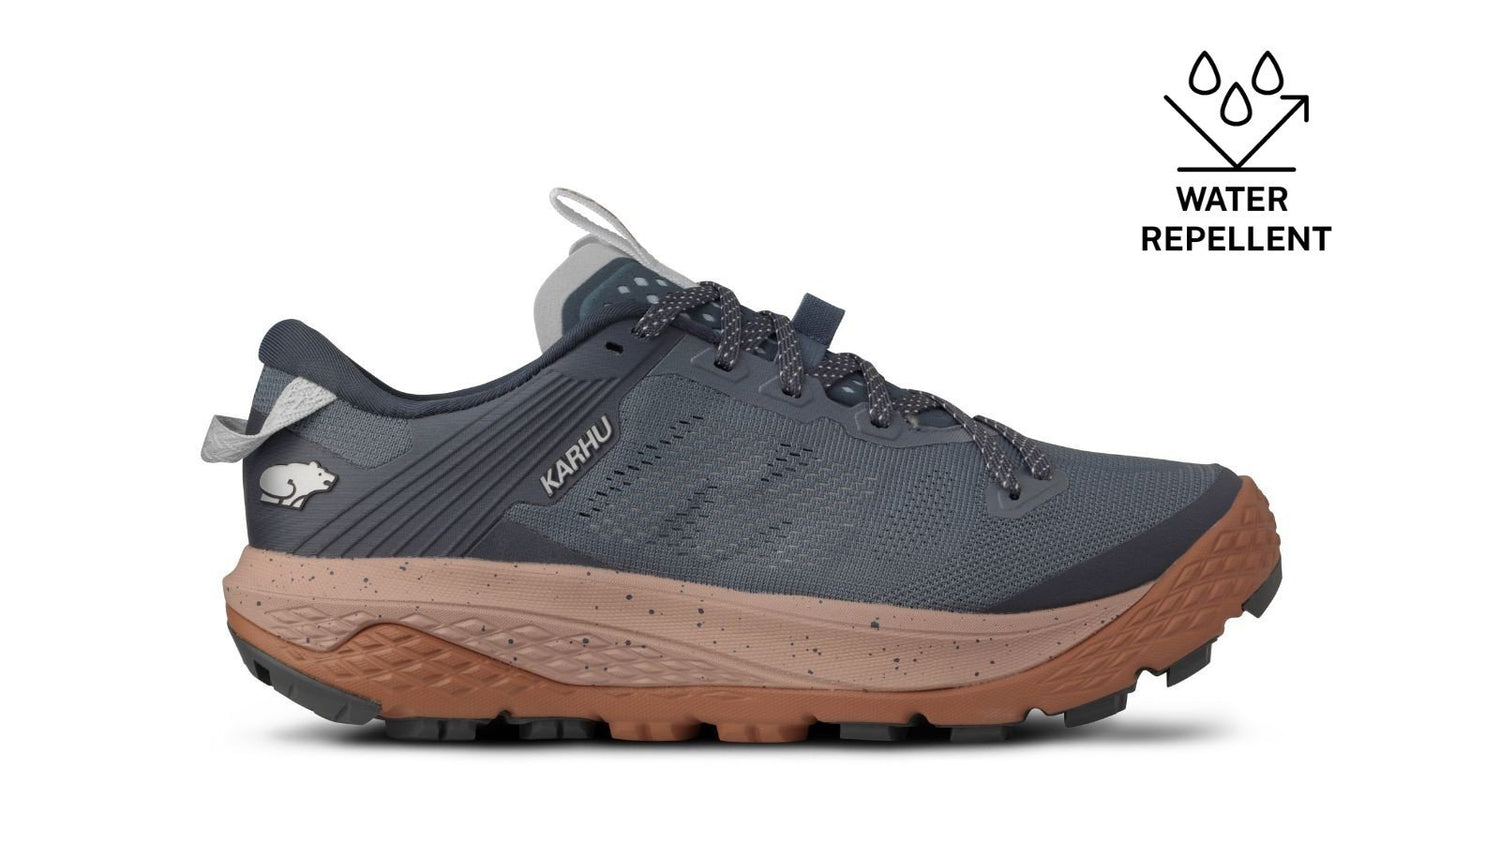 MEN'S IKONI TRAIL 1.0 WR - STORMY WEATHER / RUGBY TAN